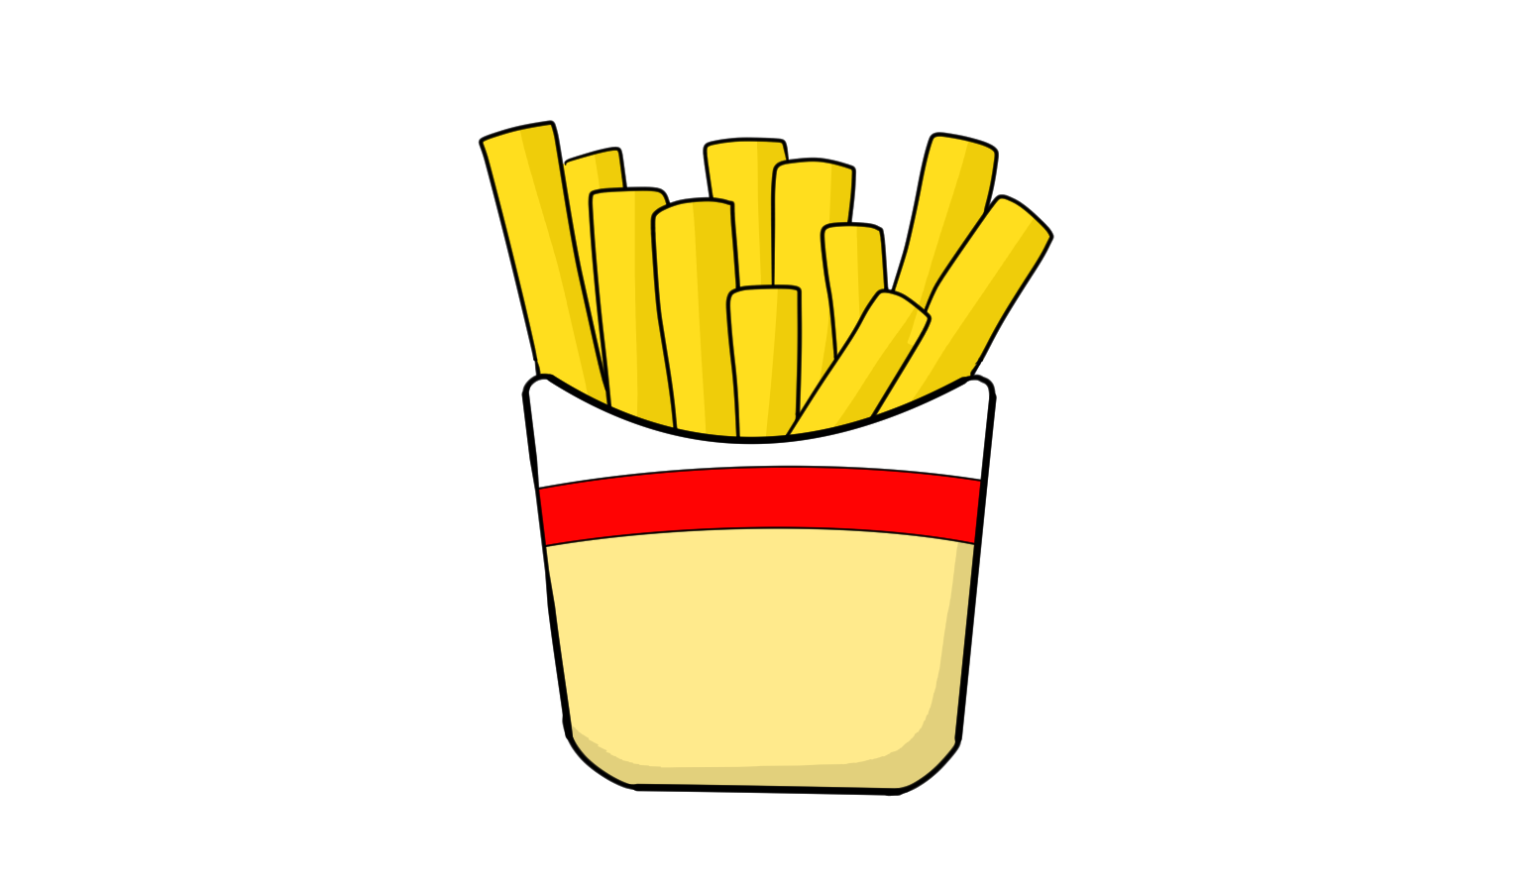 french-fries-2